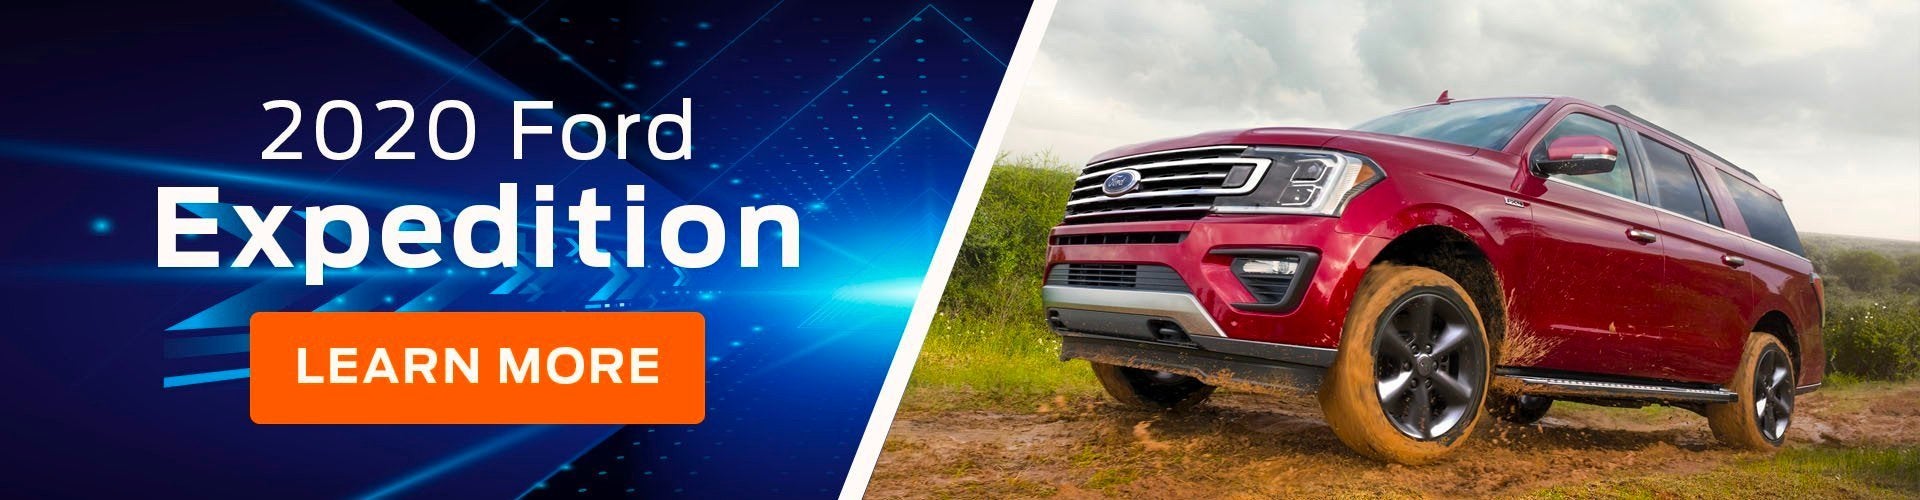 2020 Ford Expedition: Learn More